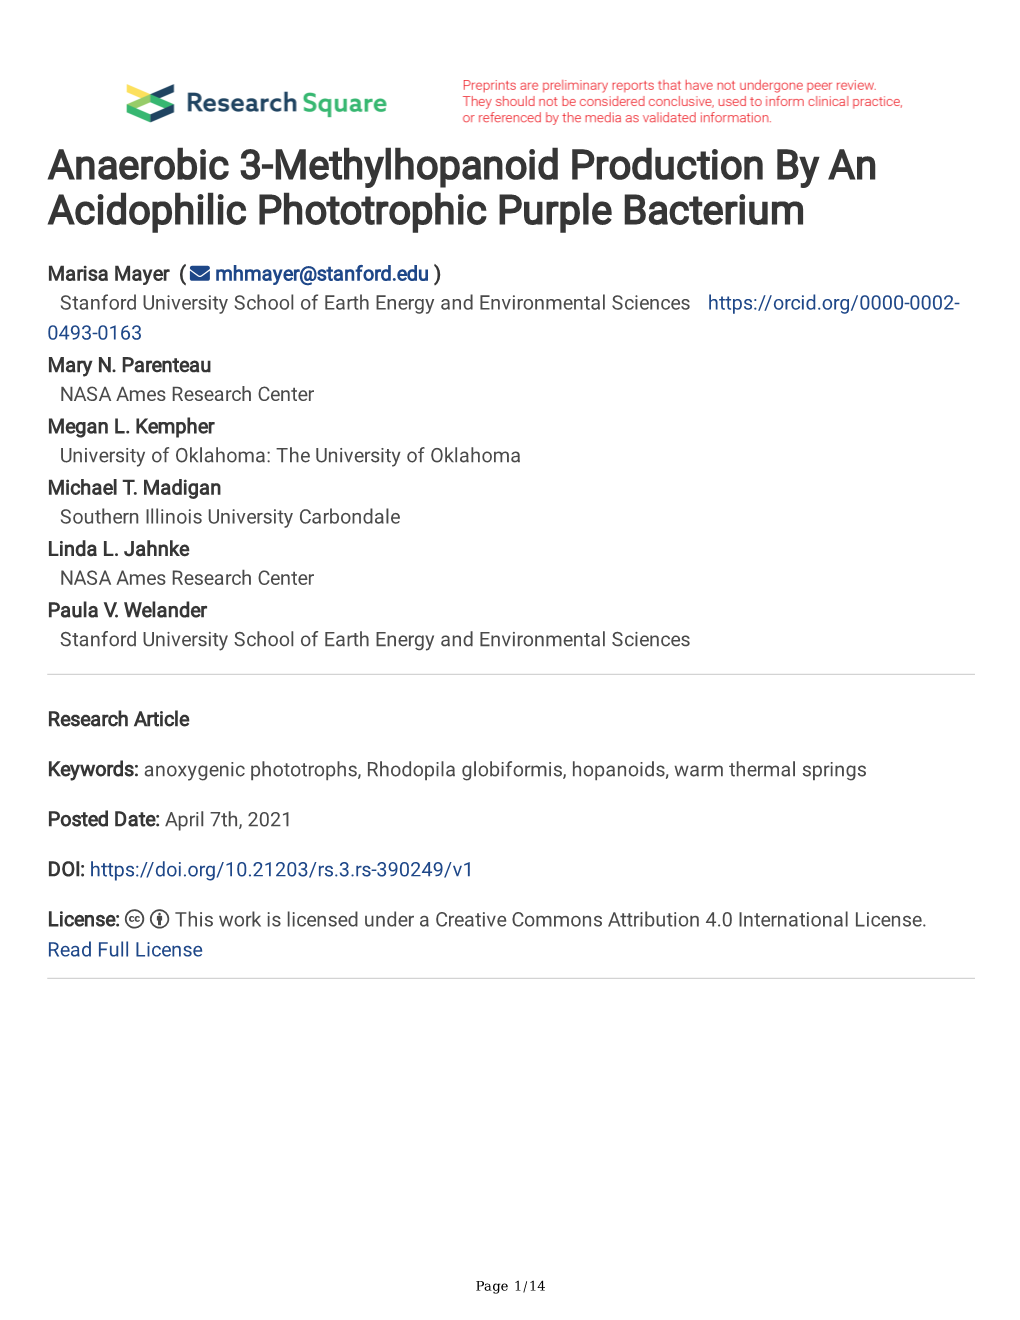 Anaerobic 3-Methylhopanoid Production by an Acidophilic Phototrophic Purple Bacterium